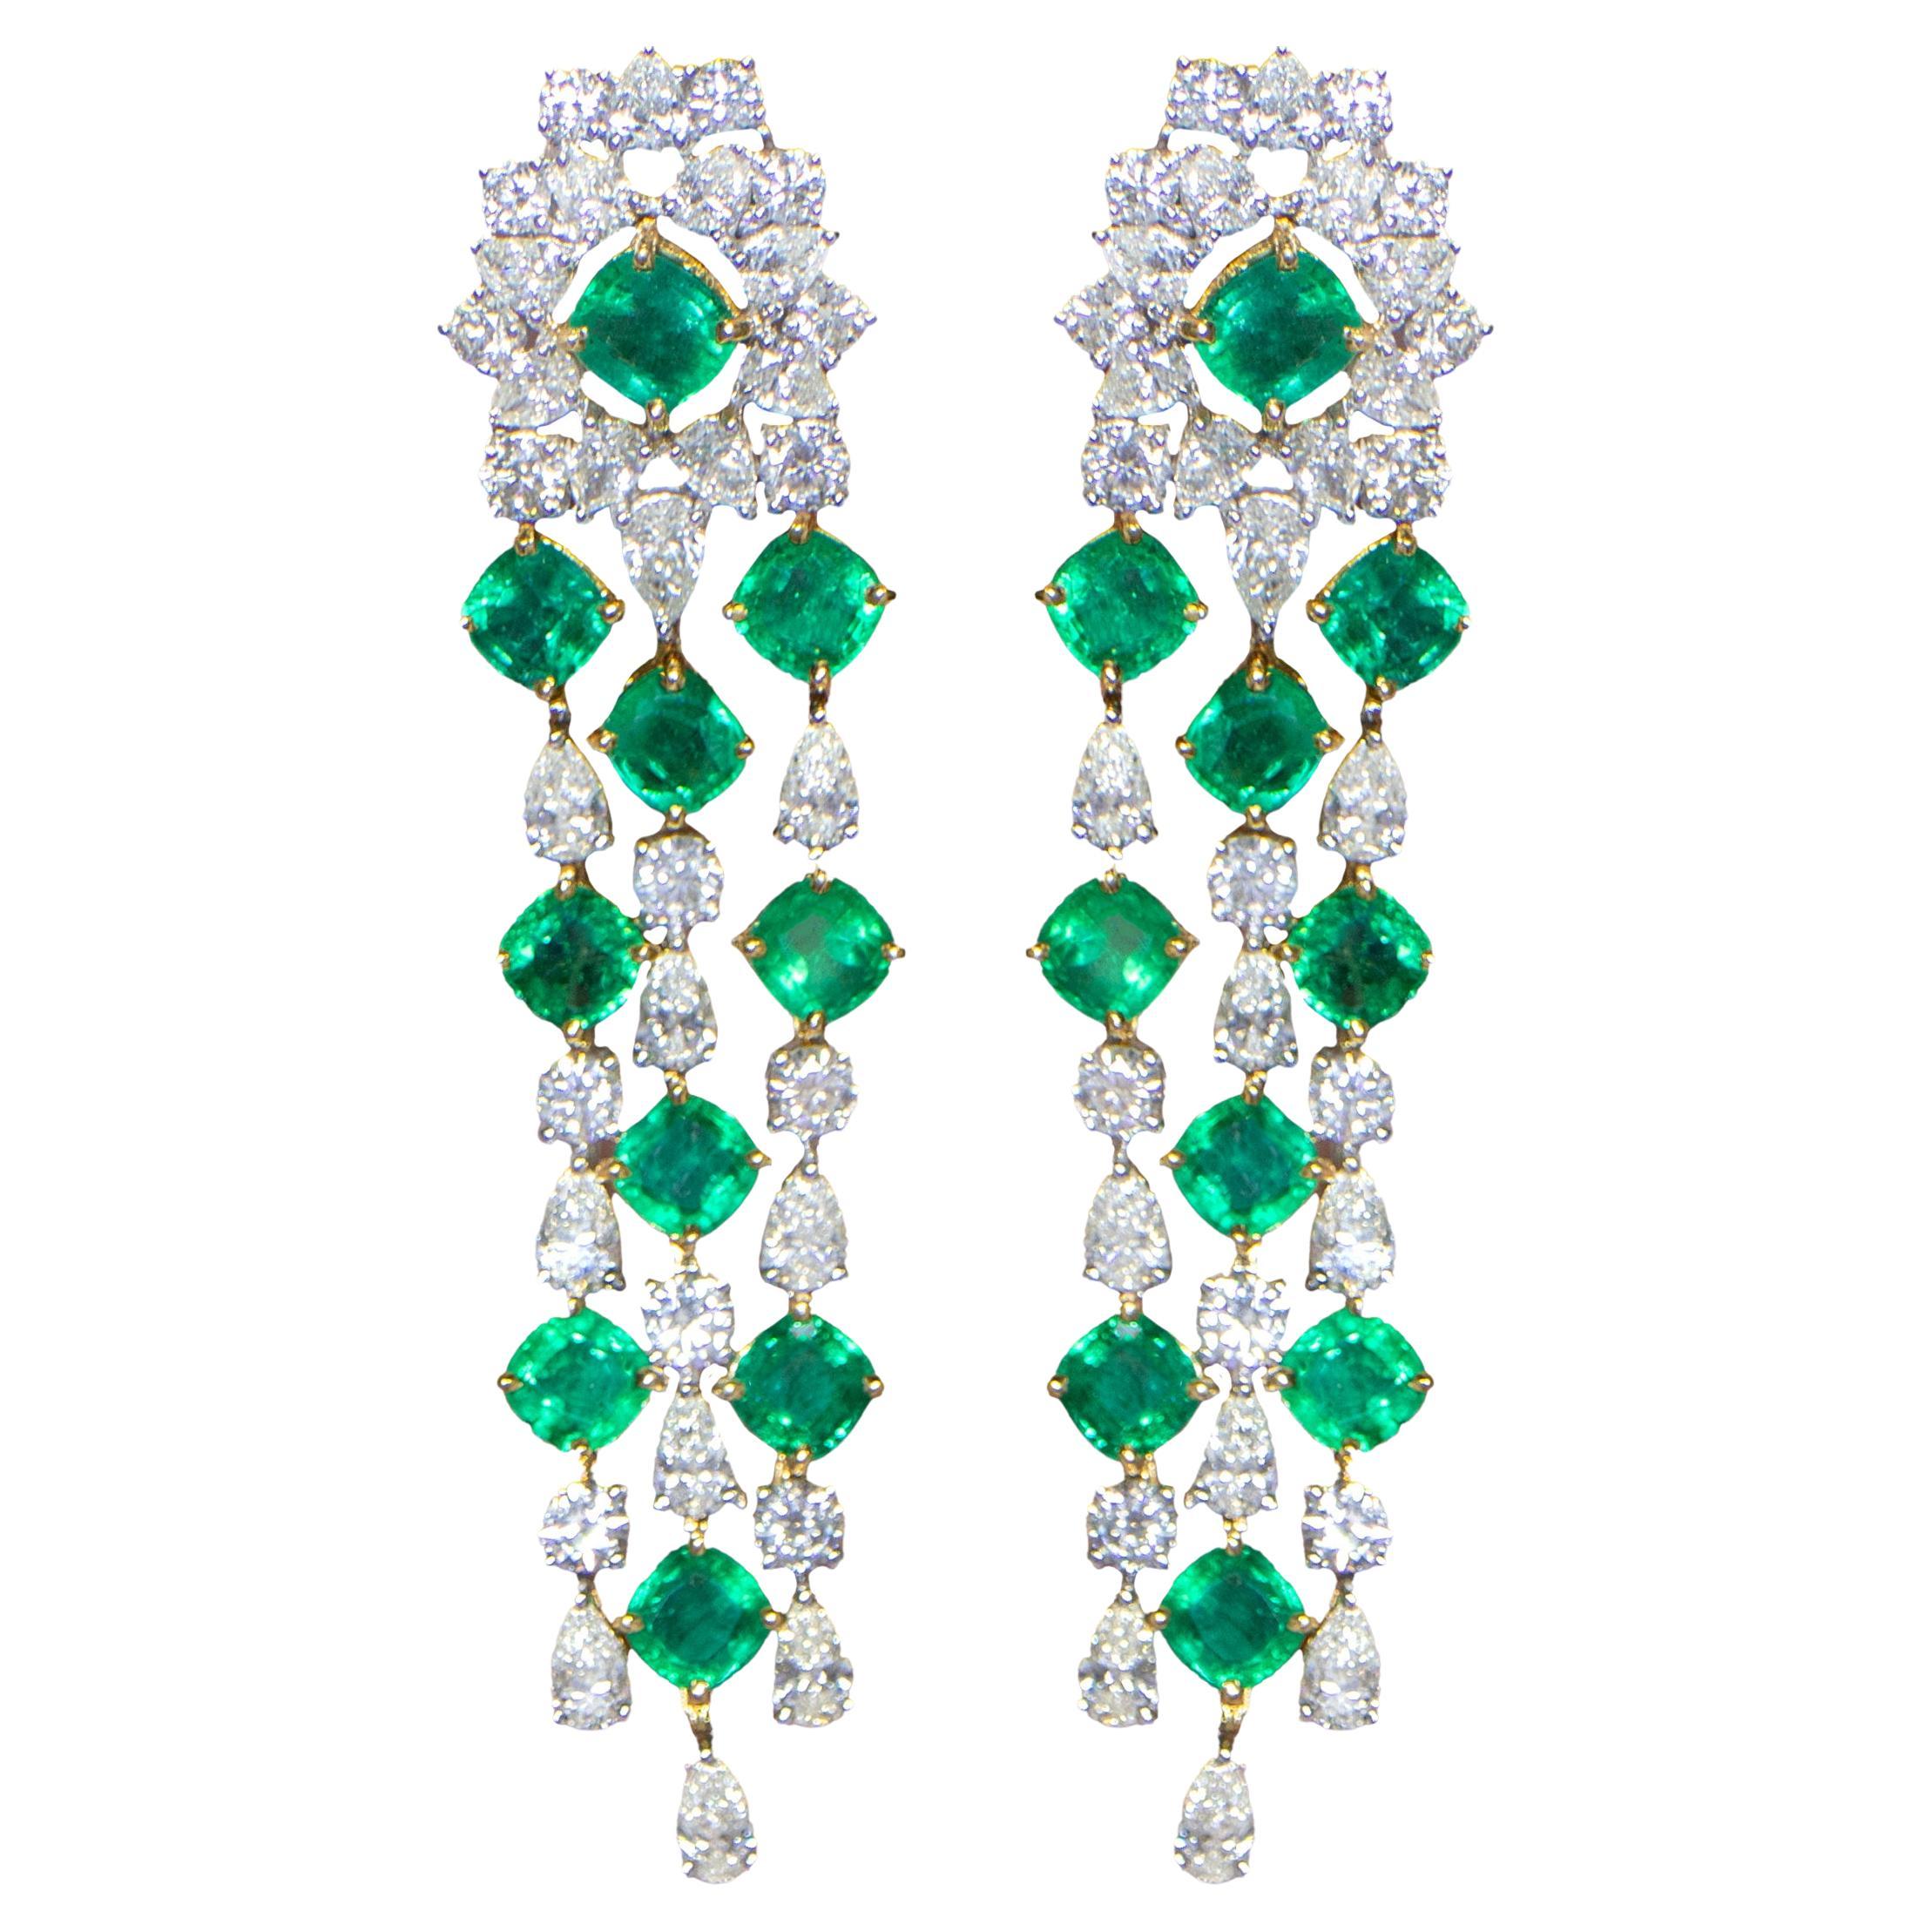 Important Emerald and Diamond Chandelier Earrings 29 Carats 18K Gold